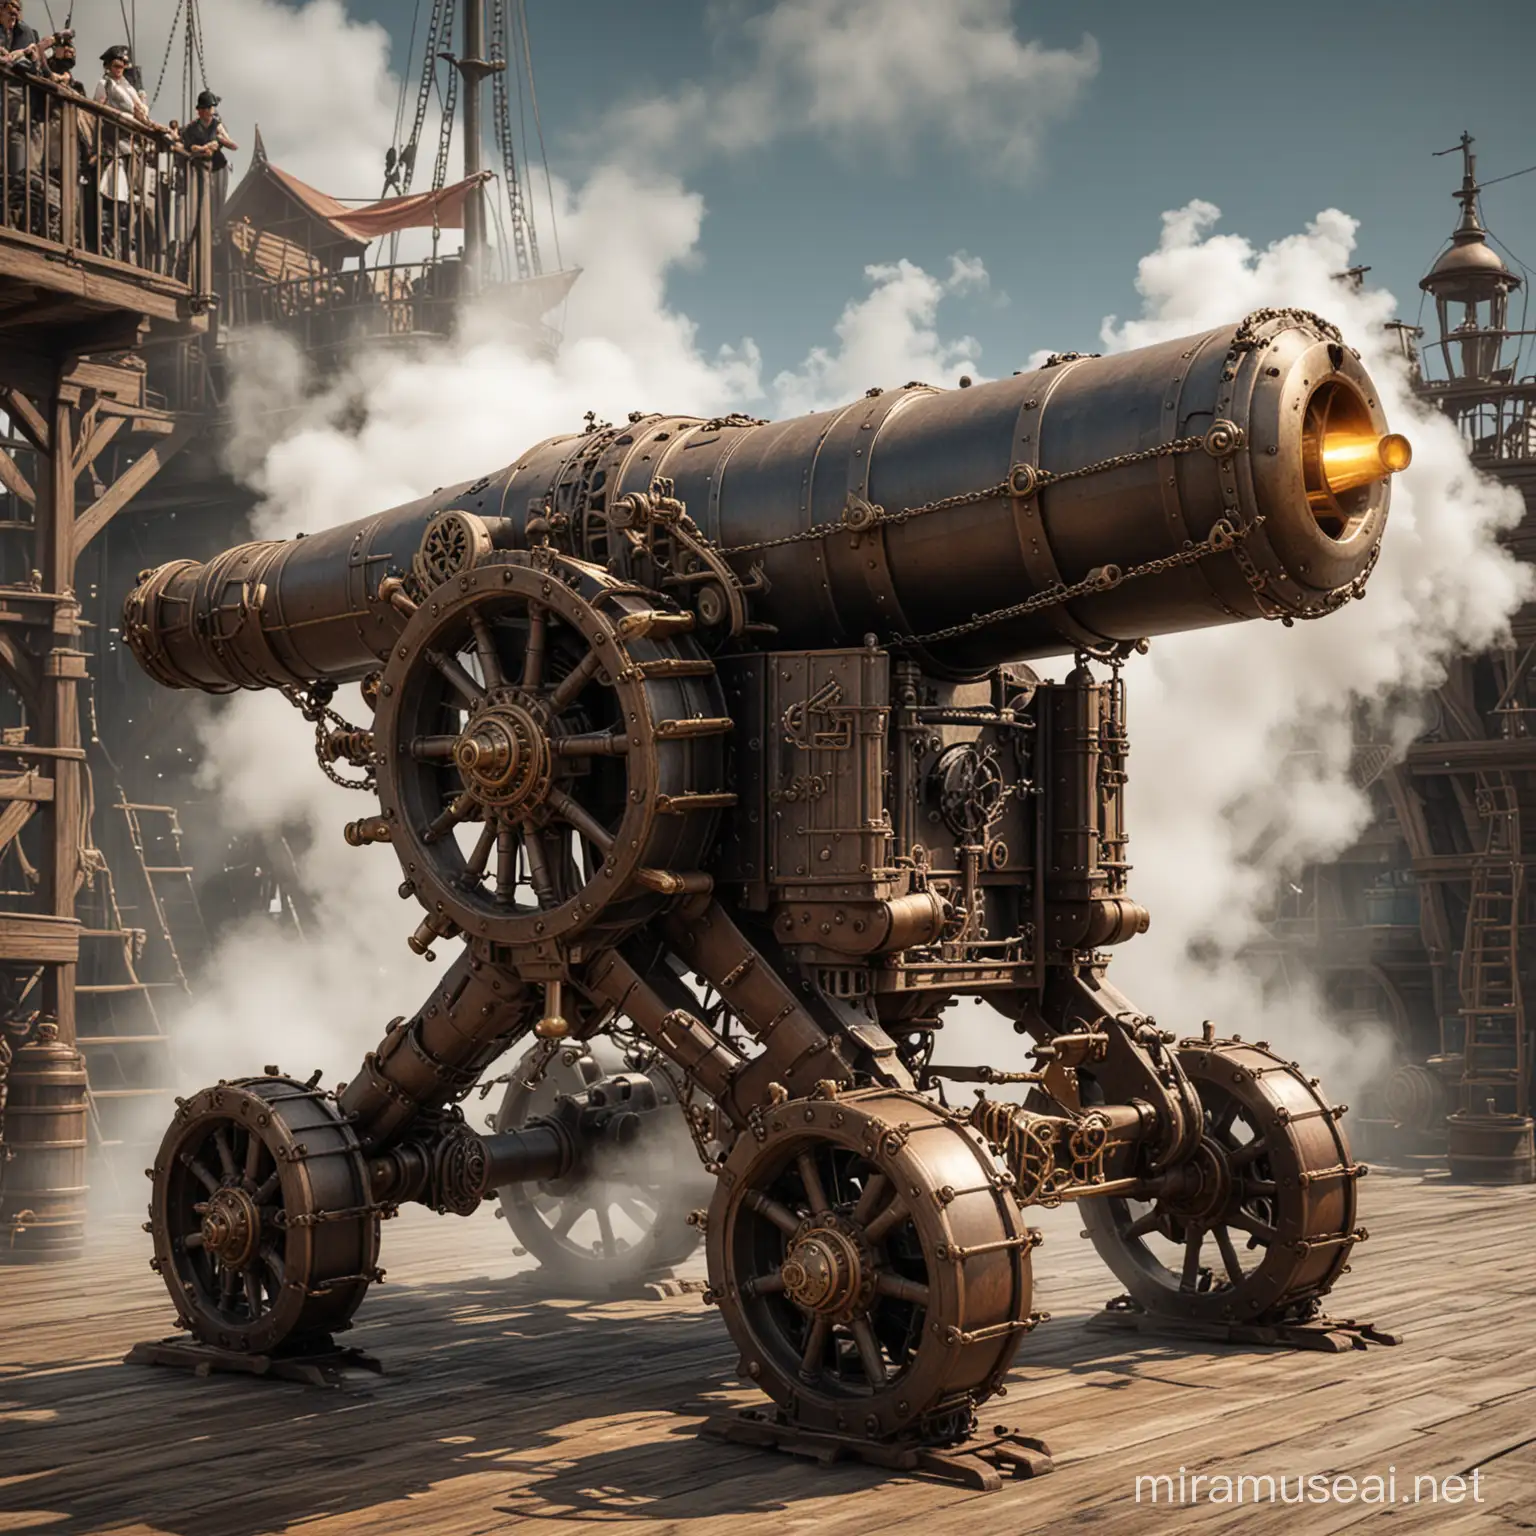 Steampunk Pirate Ship Cannon with Intricate Mechanical Legs